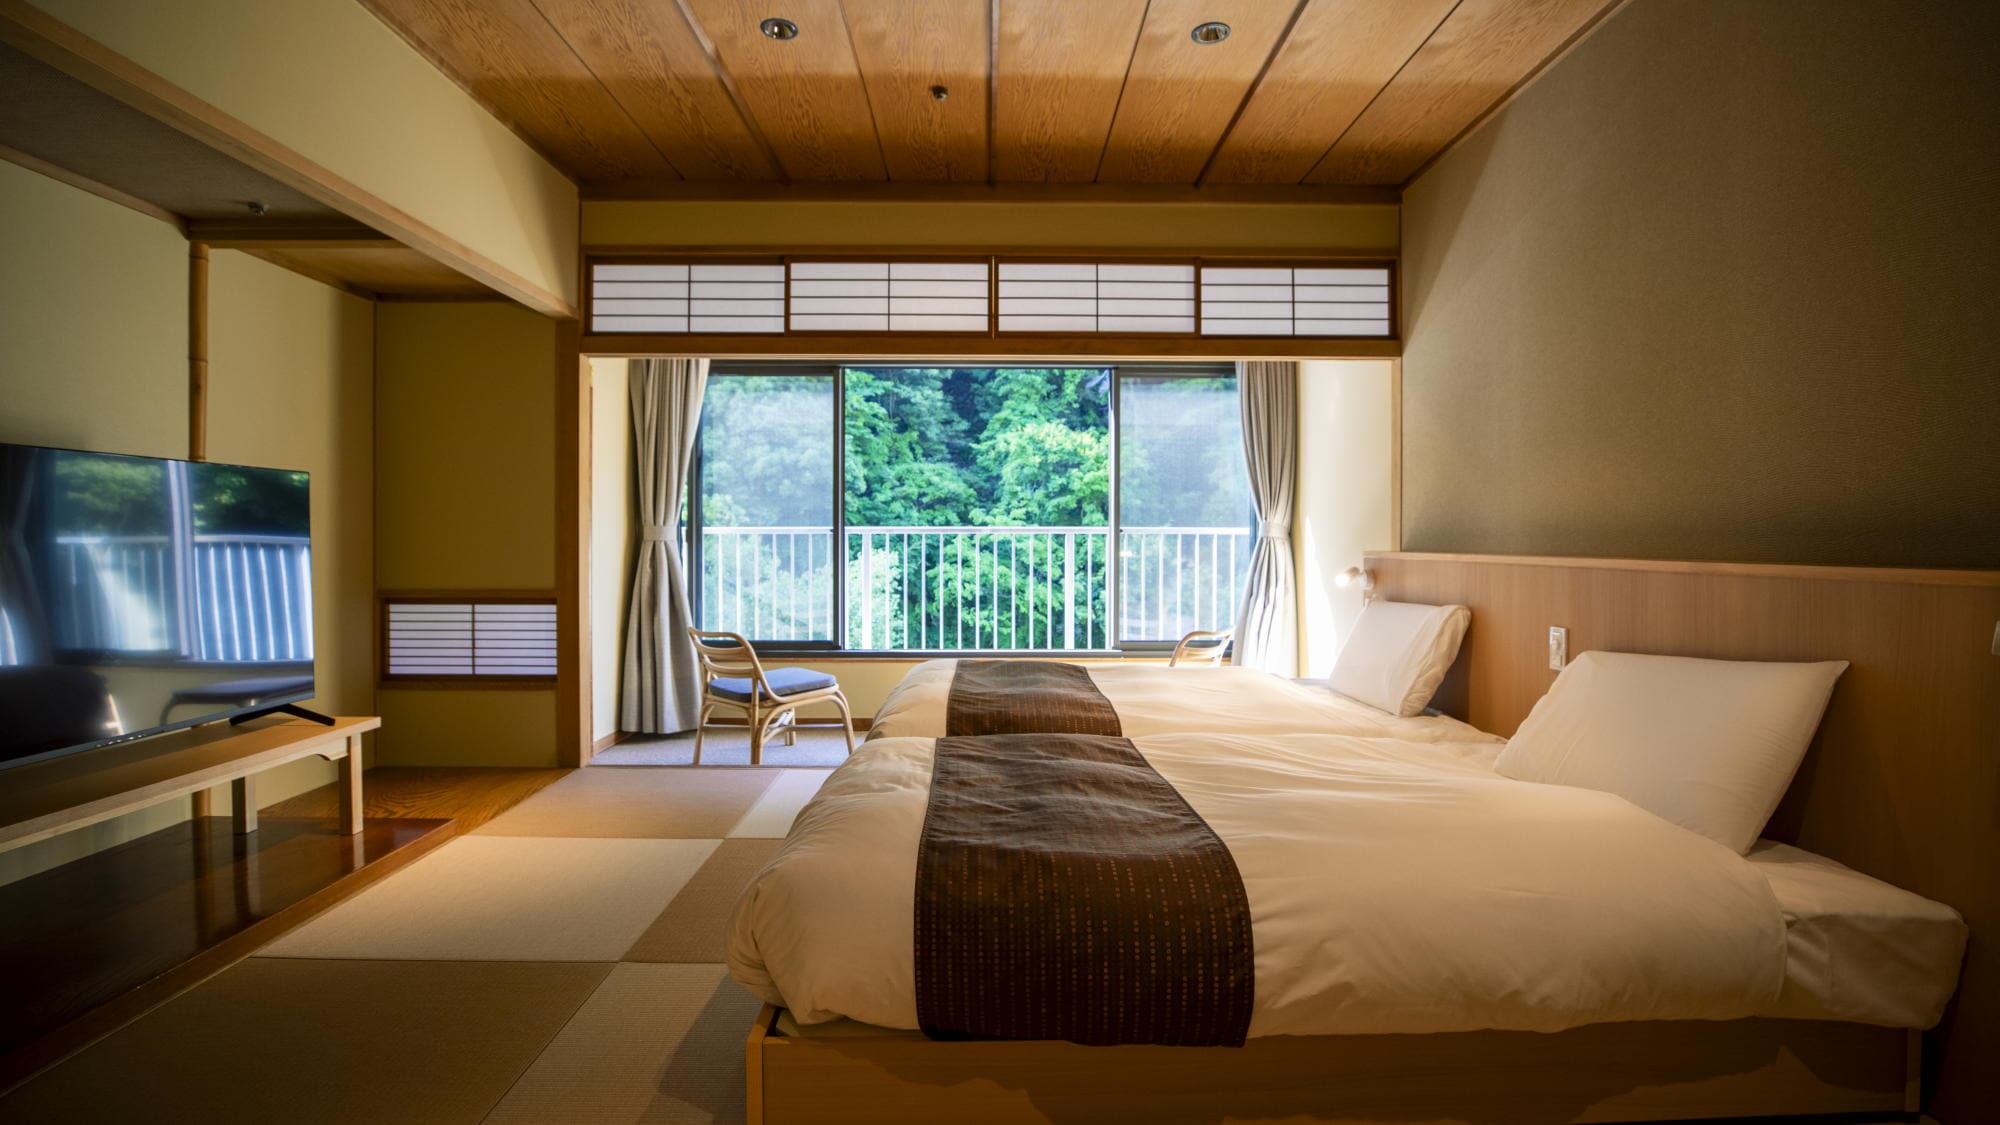 An example of a Japanese-style Hollywood twin room with hot spring water and an indoor bath along the river